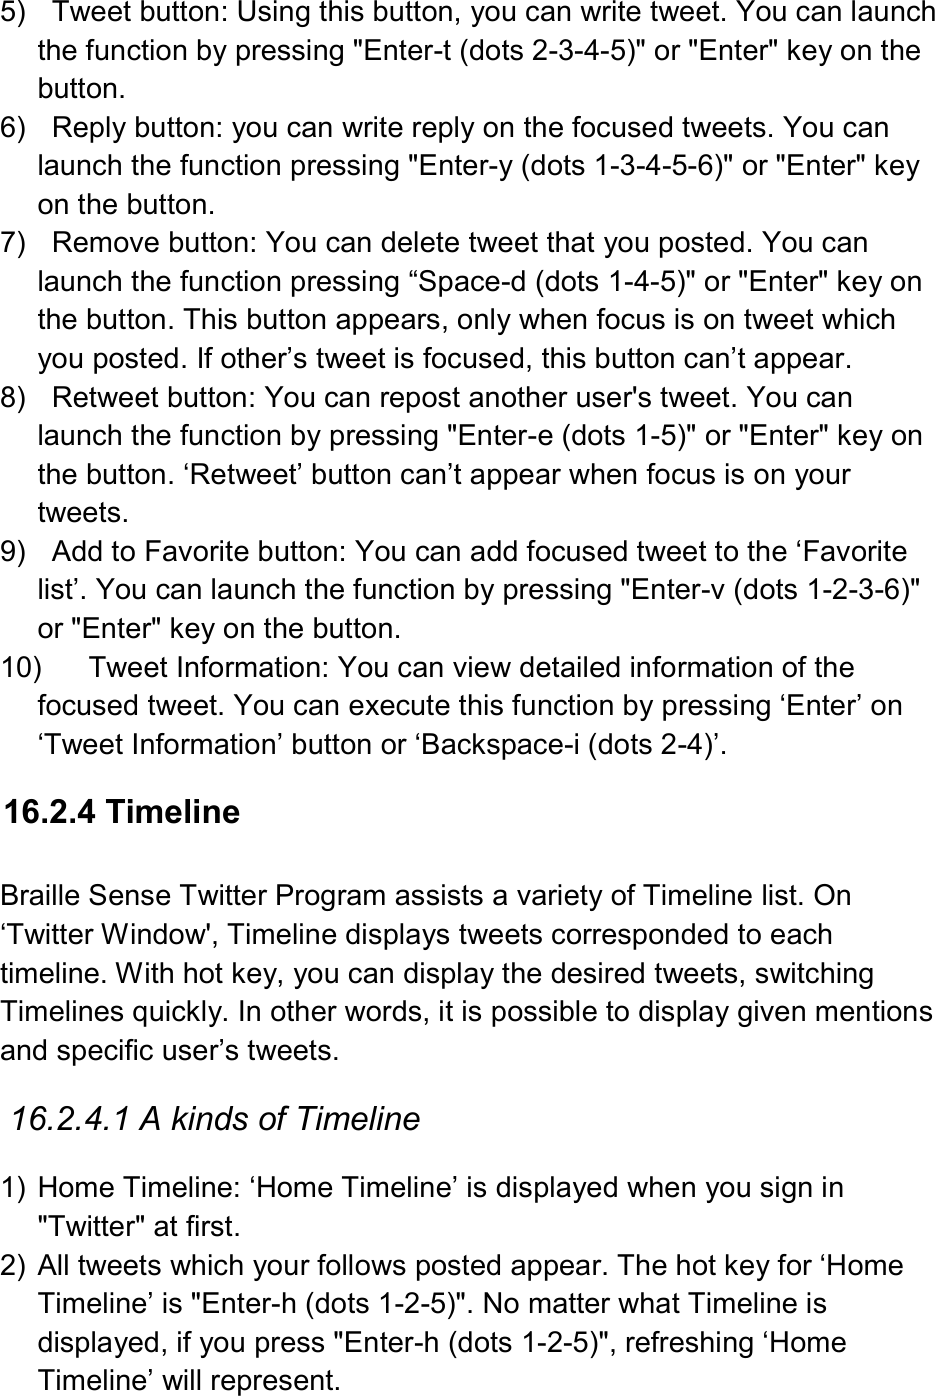  5)    Tweet button: Using this button, you can write tweet. You can launch the function by pressing &quot;Enter-t (dots 2-3-4-5)&quot; or &quot;Enter&quot; key on the button. 6)    Reply button: you can write reply on the focused tweets. You can launch the function pressing &quot;Enter-y (dots 1-3-4-5-6)&quot; or &quot;Enter&quot; key on the button. 7)    Remove button: You can delete tweet that you posted. You can launch the function pressing “Space-d (dots 1-4-5)&quot; or &quot;Enter&quot; key on the button. This button appears, only when focus is on tweet which you posted. If other’s tweet is focused, this button can’t appear. 8)    Retweet button: You can repost another user&apos;s tweet. You can launch the function by pressing &quot;Enter-e (dots 1-5)&quot; or &quot;Enter&quot; key on the button. ‘Retweet’ button can’t appear when focus is on your tweets.   9)    Add to Favorite button: You can add focused tweet to the ‘Favorite list’. You can launch the function by pressing &quot;Enter-v (dots 1-2-3-6)&quot; or &quot;Enter&quot; key on the button.   10)  Tweet Information: You can view detailed information of the focused tweet. You can execute this function by pressing ‘Enter’ on ‘Tweet Information’ button or ‘Backspace-i (dots 2-4)’.    16.2.4 Timeline  Braille Sense Twitter Program assists a variety of Timeline list. On ‘Twitter Window&apos;, Timeline displays tweets corresponded to each timeline. With hot key, you can display the desired tweets, switching Timelines quickly. In other words, it is possible to display given mentions and specific user’s tweets.  16.2.4.1 A kinds of Timeline  1)  Home Timeline: ‘Home Timeline’ is displayed when you sign in &quot;Twitter&quot; at first. 2)  All tweets which your follows posted appear. The hot key for ‘Home Timeline’ is &quot;Enter-h (dots 1-2-5)&quot;. No matter what Timeline is displayed, if you press &quot;Enter-h (dots 1-2-5)&quot;, refreshing ‘Home Timeline’ will represent. 